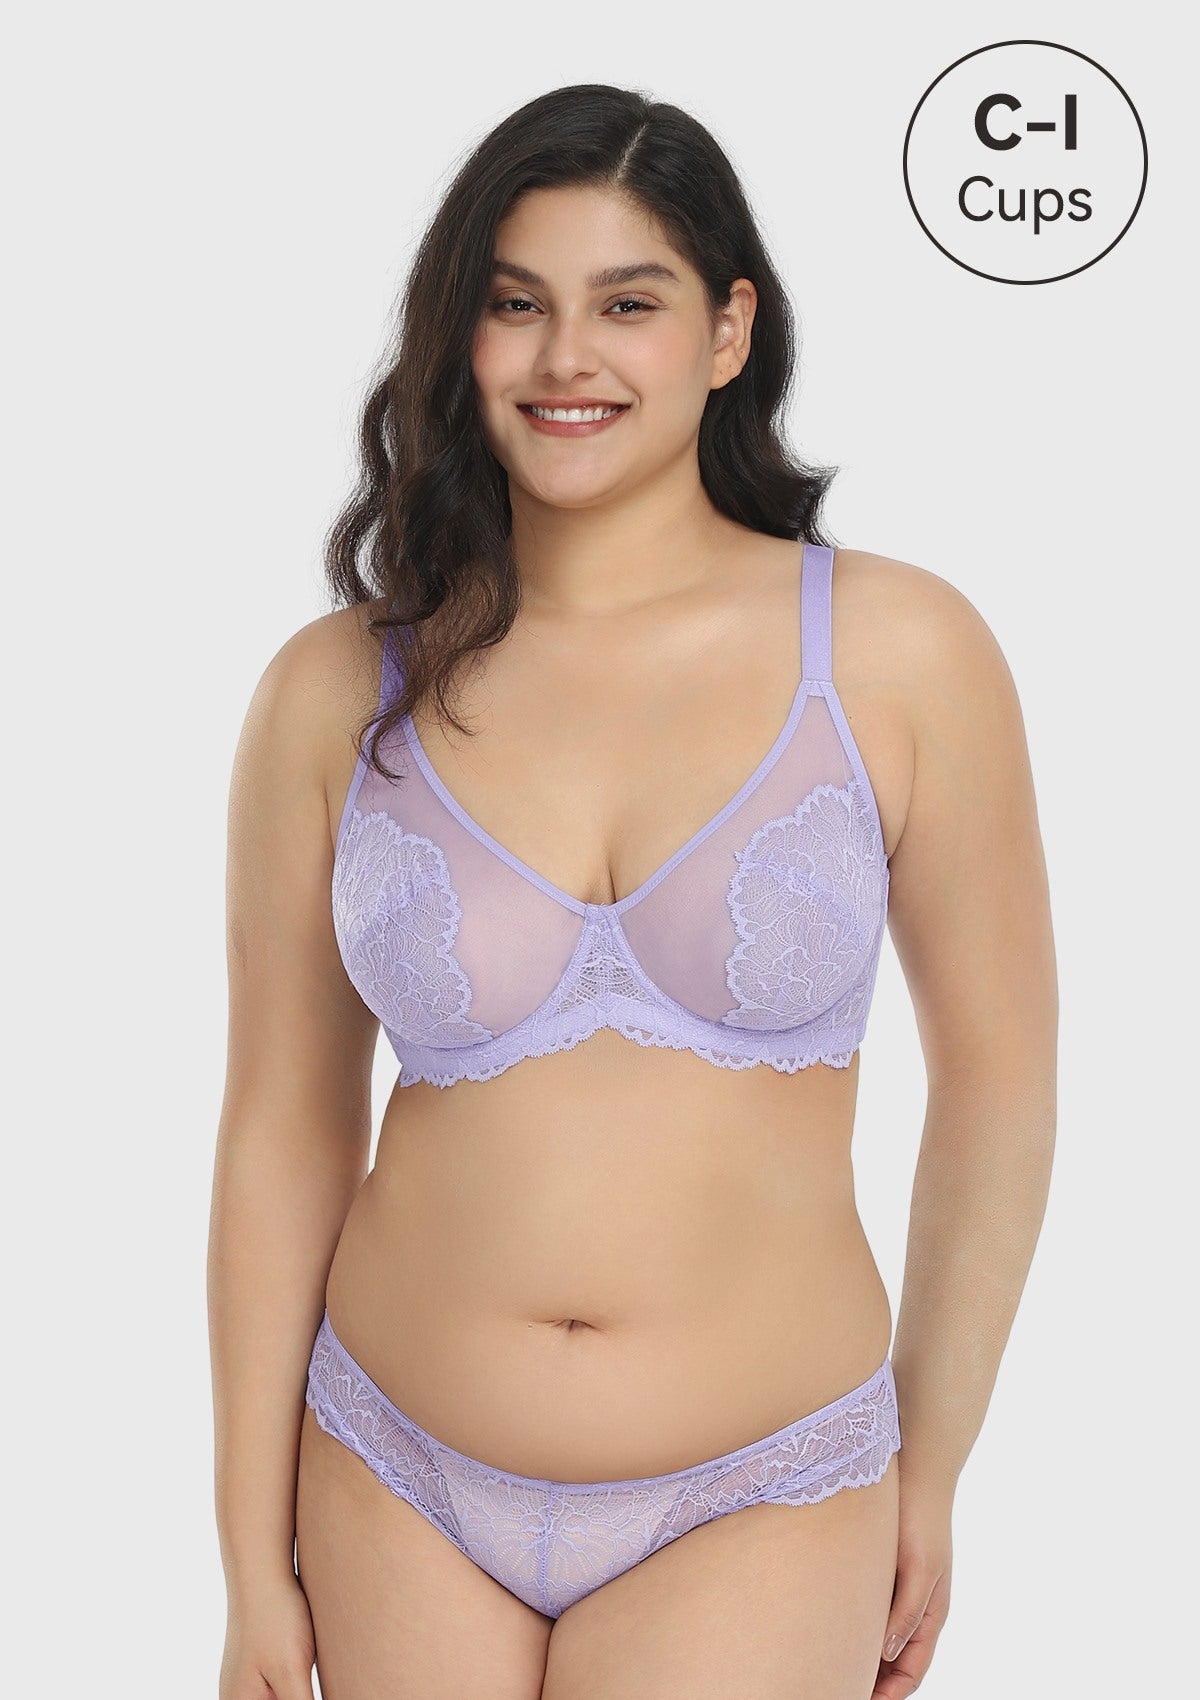 HSIA Blossom Transparent Lace Bra: Plus Size Wired Back Smoothing Bra - Light Purple / 44 / DDD/F